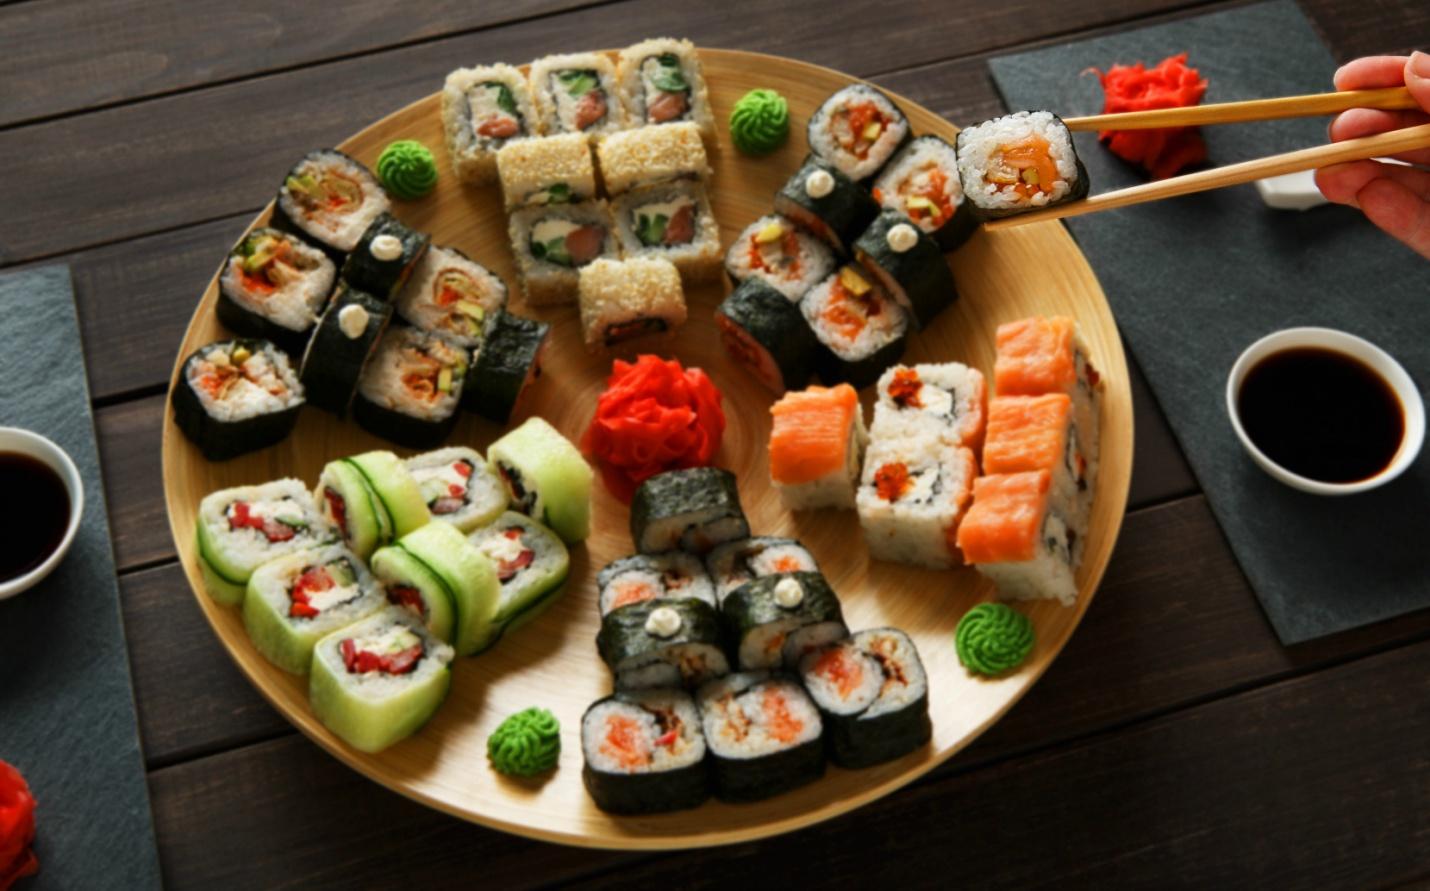 is-sushi-safe-to-eat-2.jpg